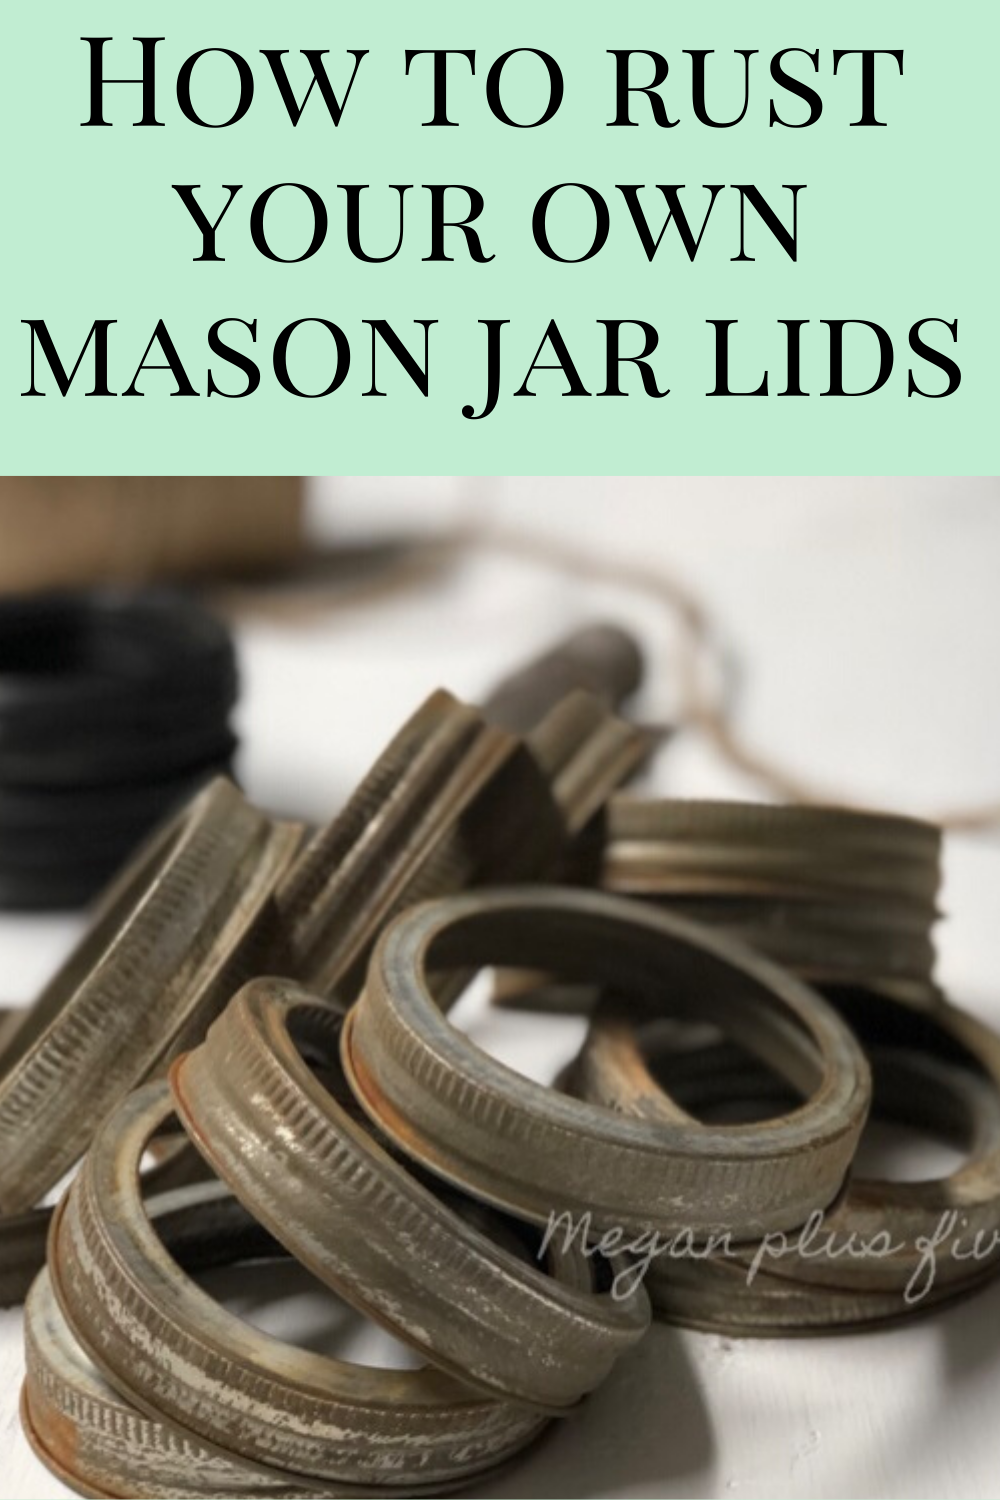 How to rust your own mason jar lids inside. Easy recipe for rusting canning jar lids for your rustic country chic home decorations and craft projects.